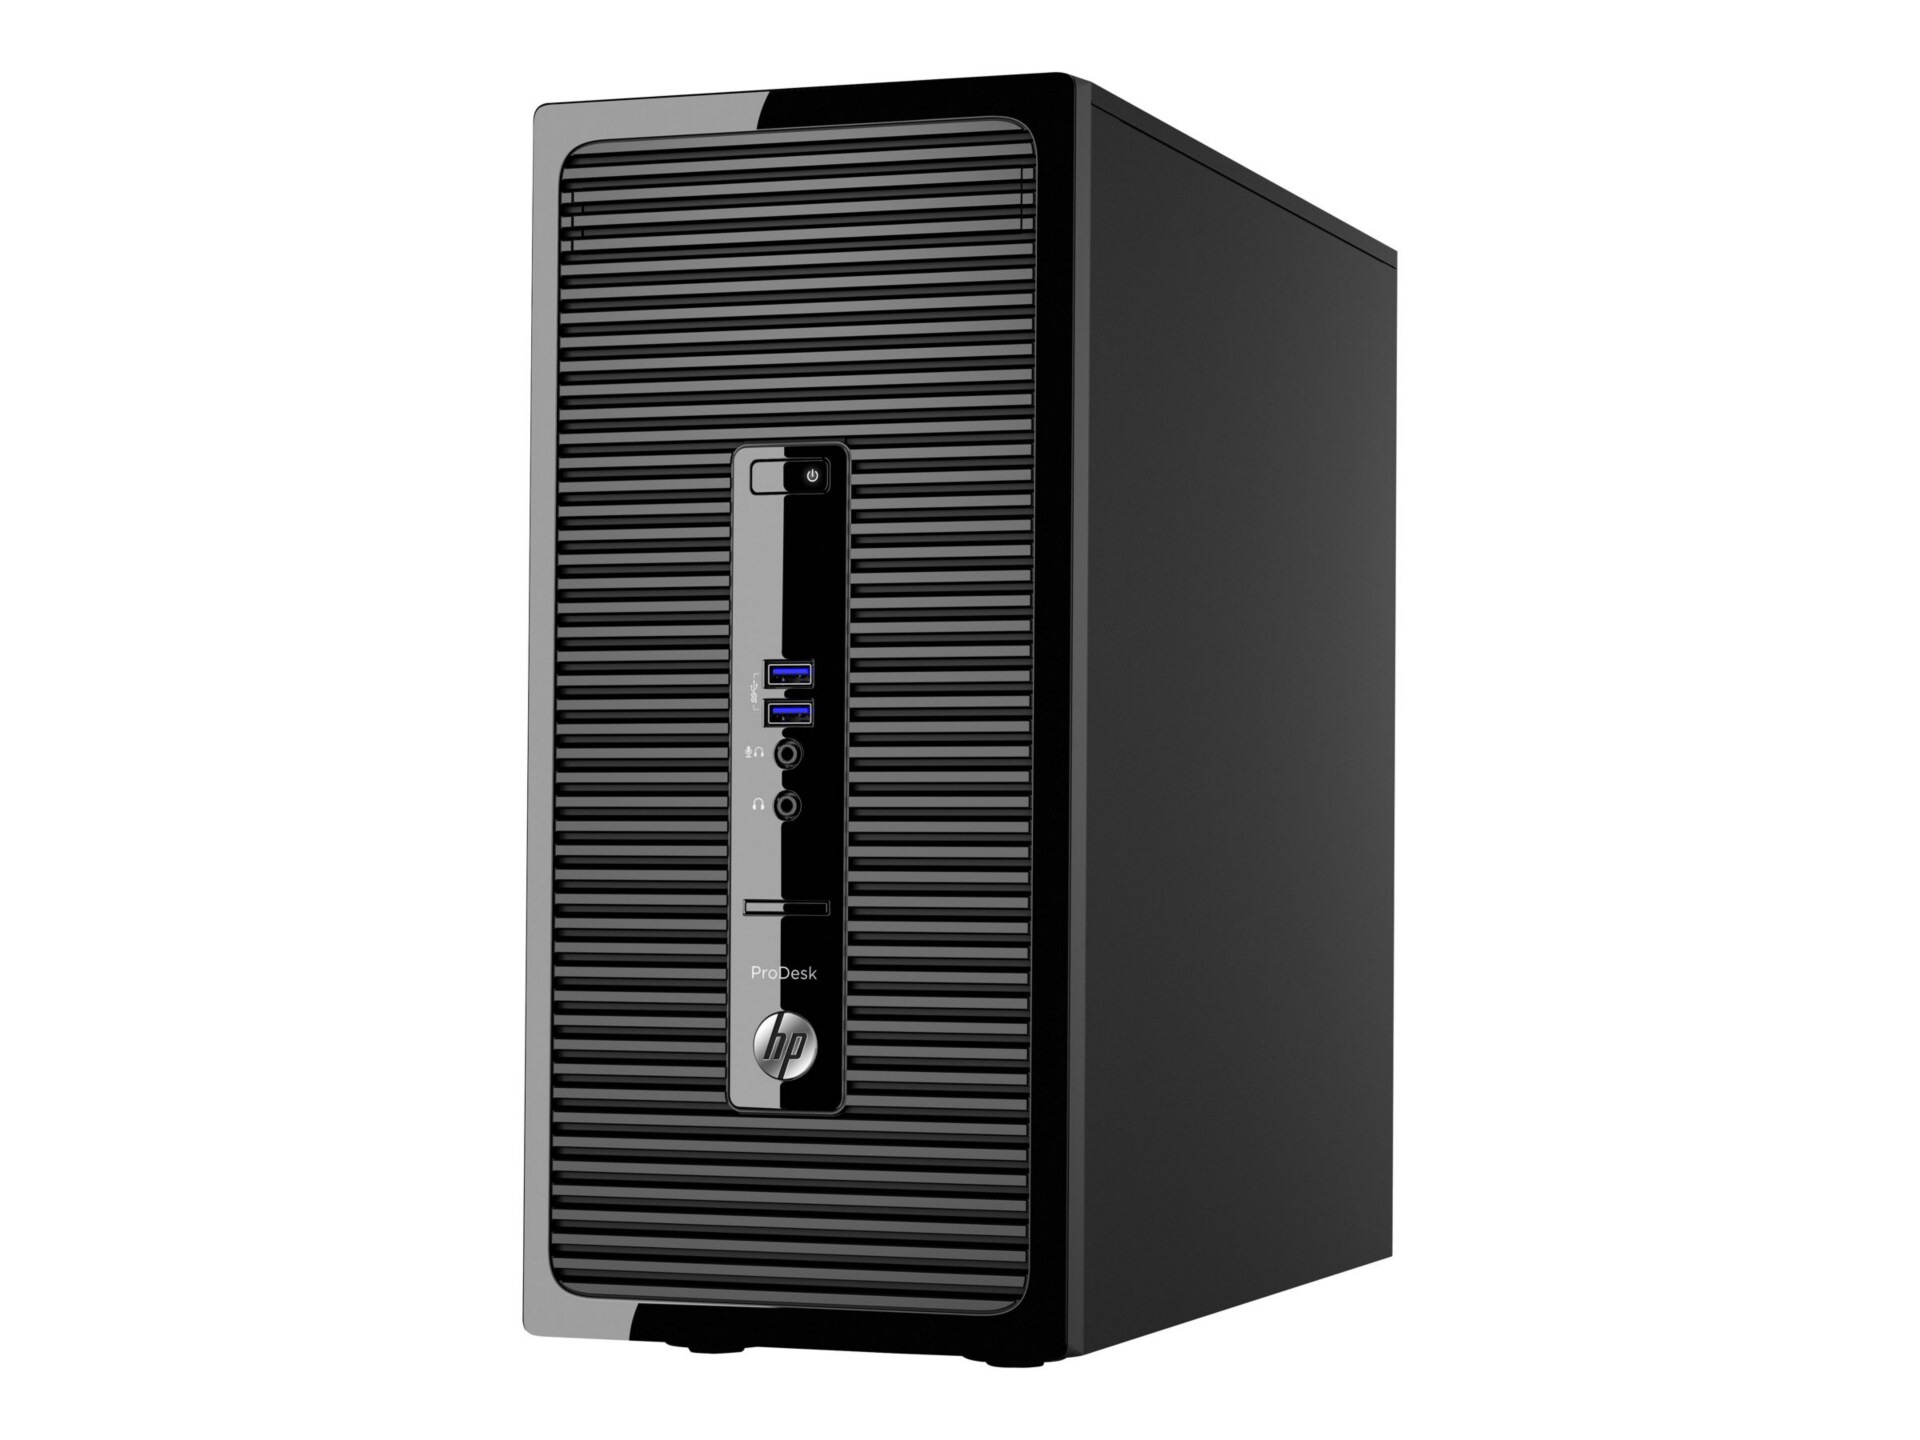 HP ProDesk 400 G3 - micro tower - Core i3 6100 3.7 GHz - 4 GB - 500 GB